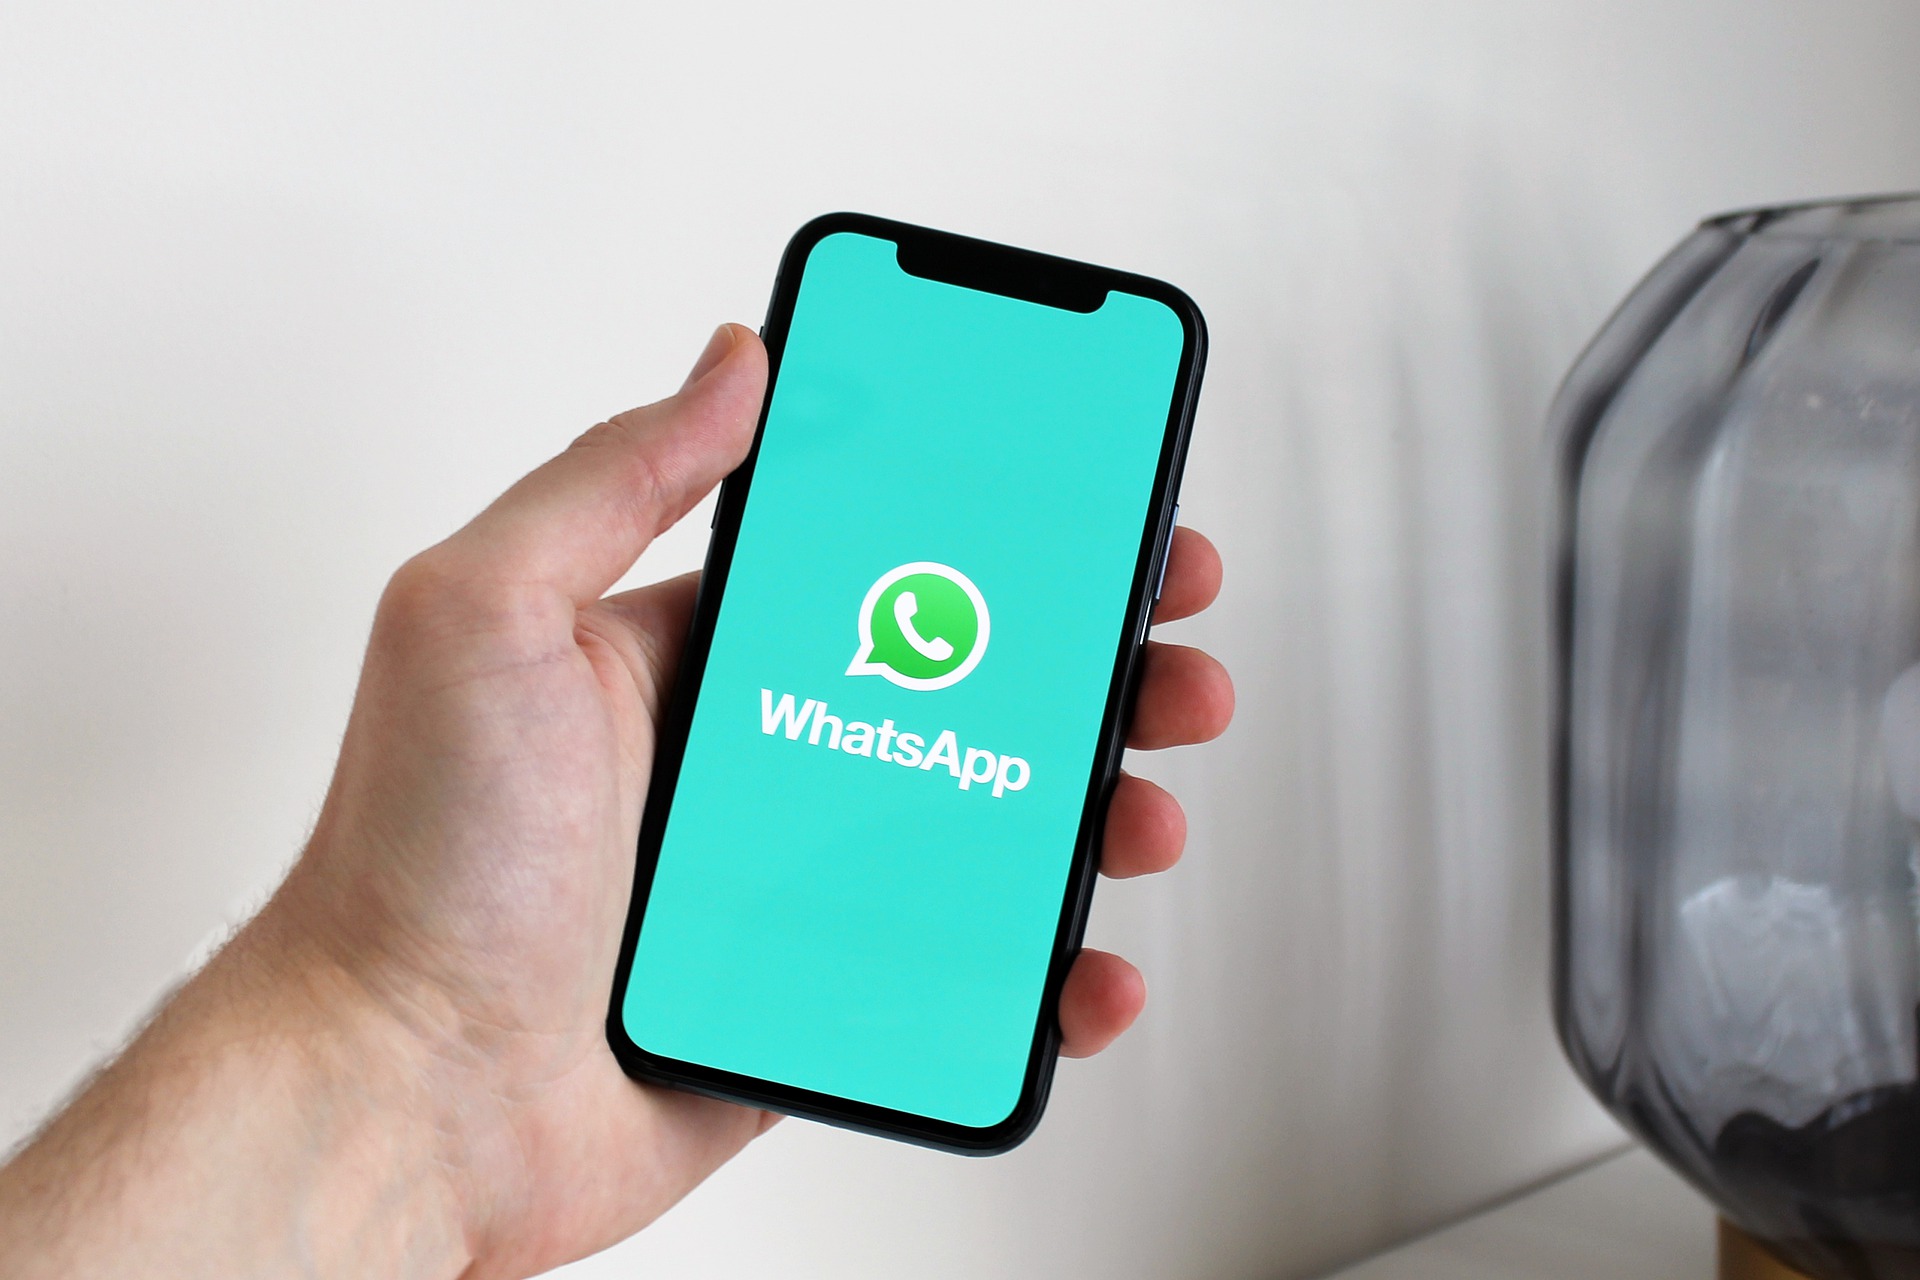 See how to delete WhatsApp messages and free up space on your cell phone